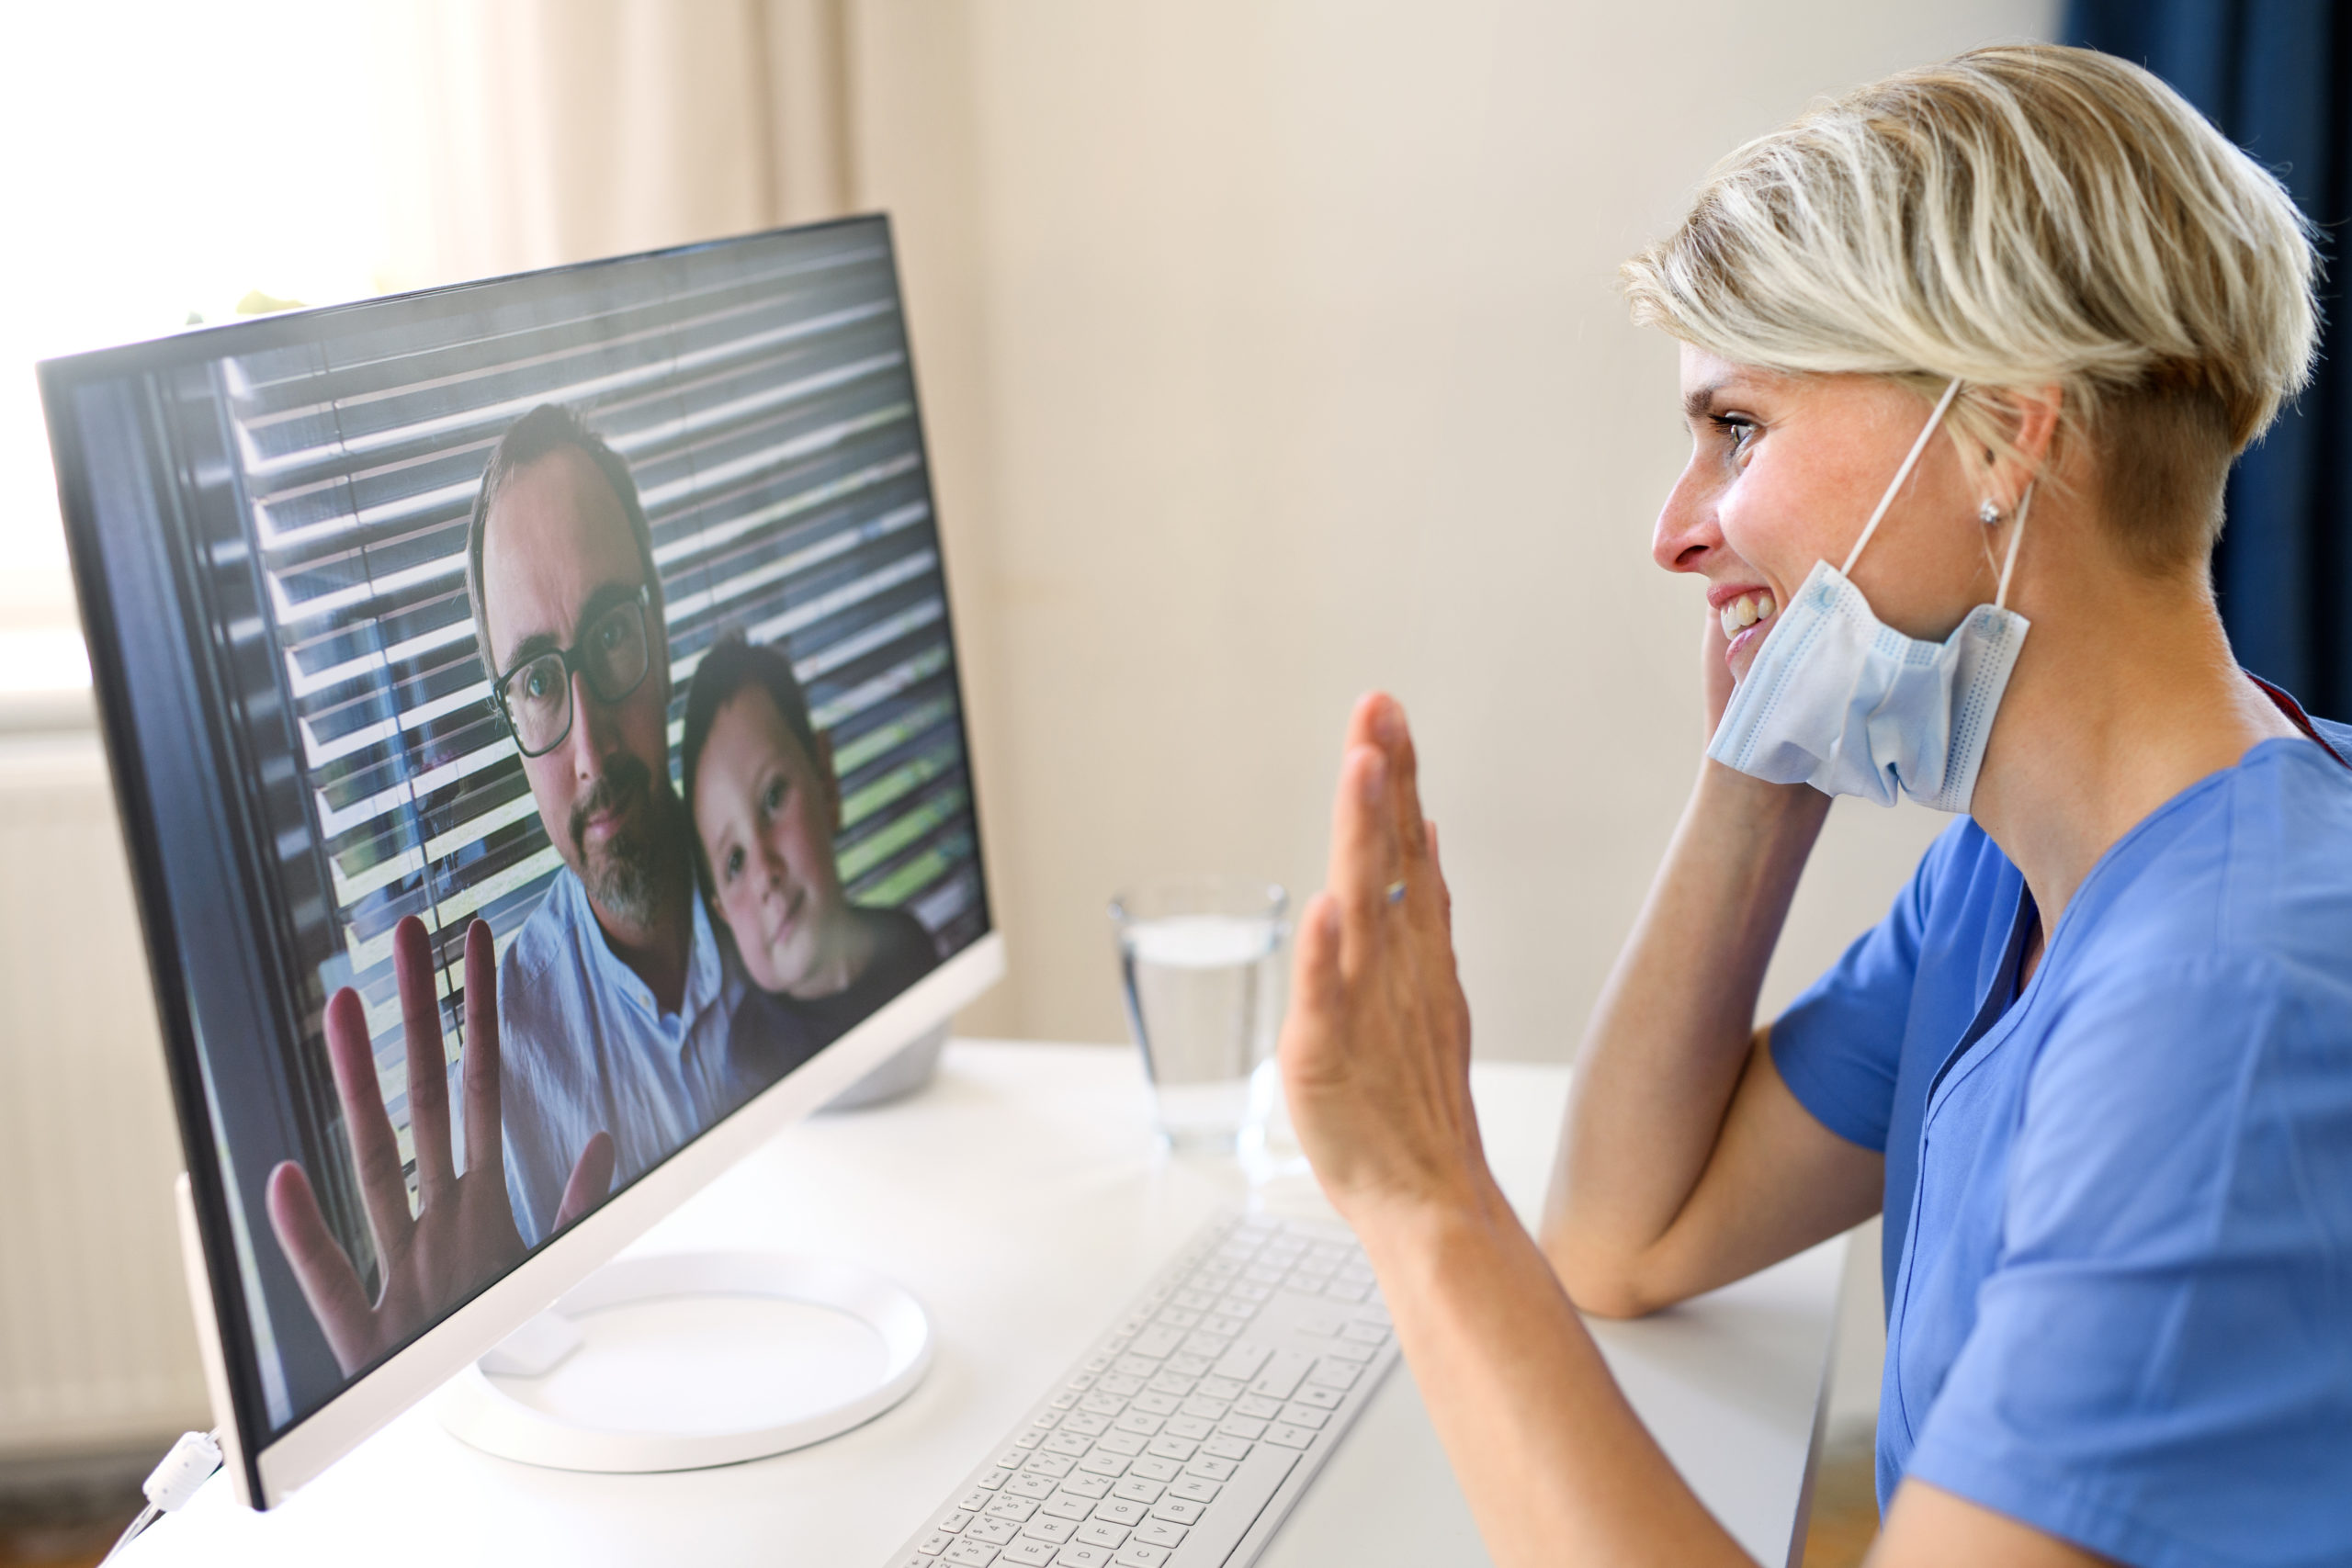 A healthcare professional in blue is engaging in an online therapy session with a patient and child, symbolizing the online therapy services available in Florida."